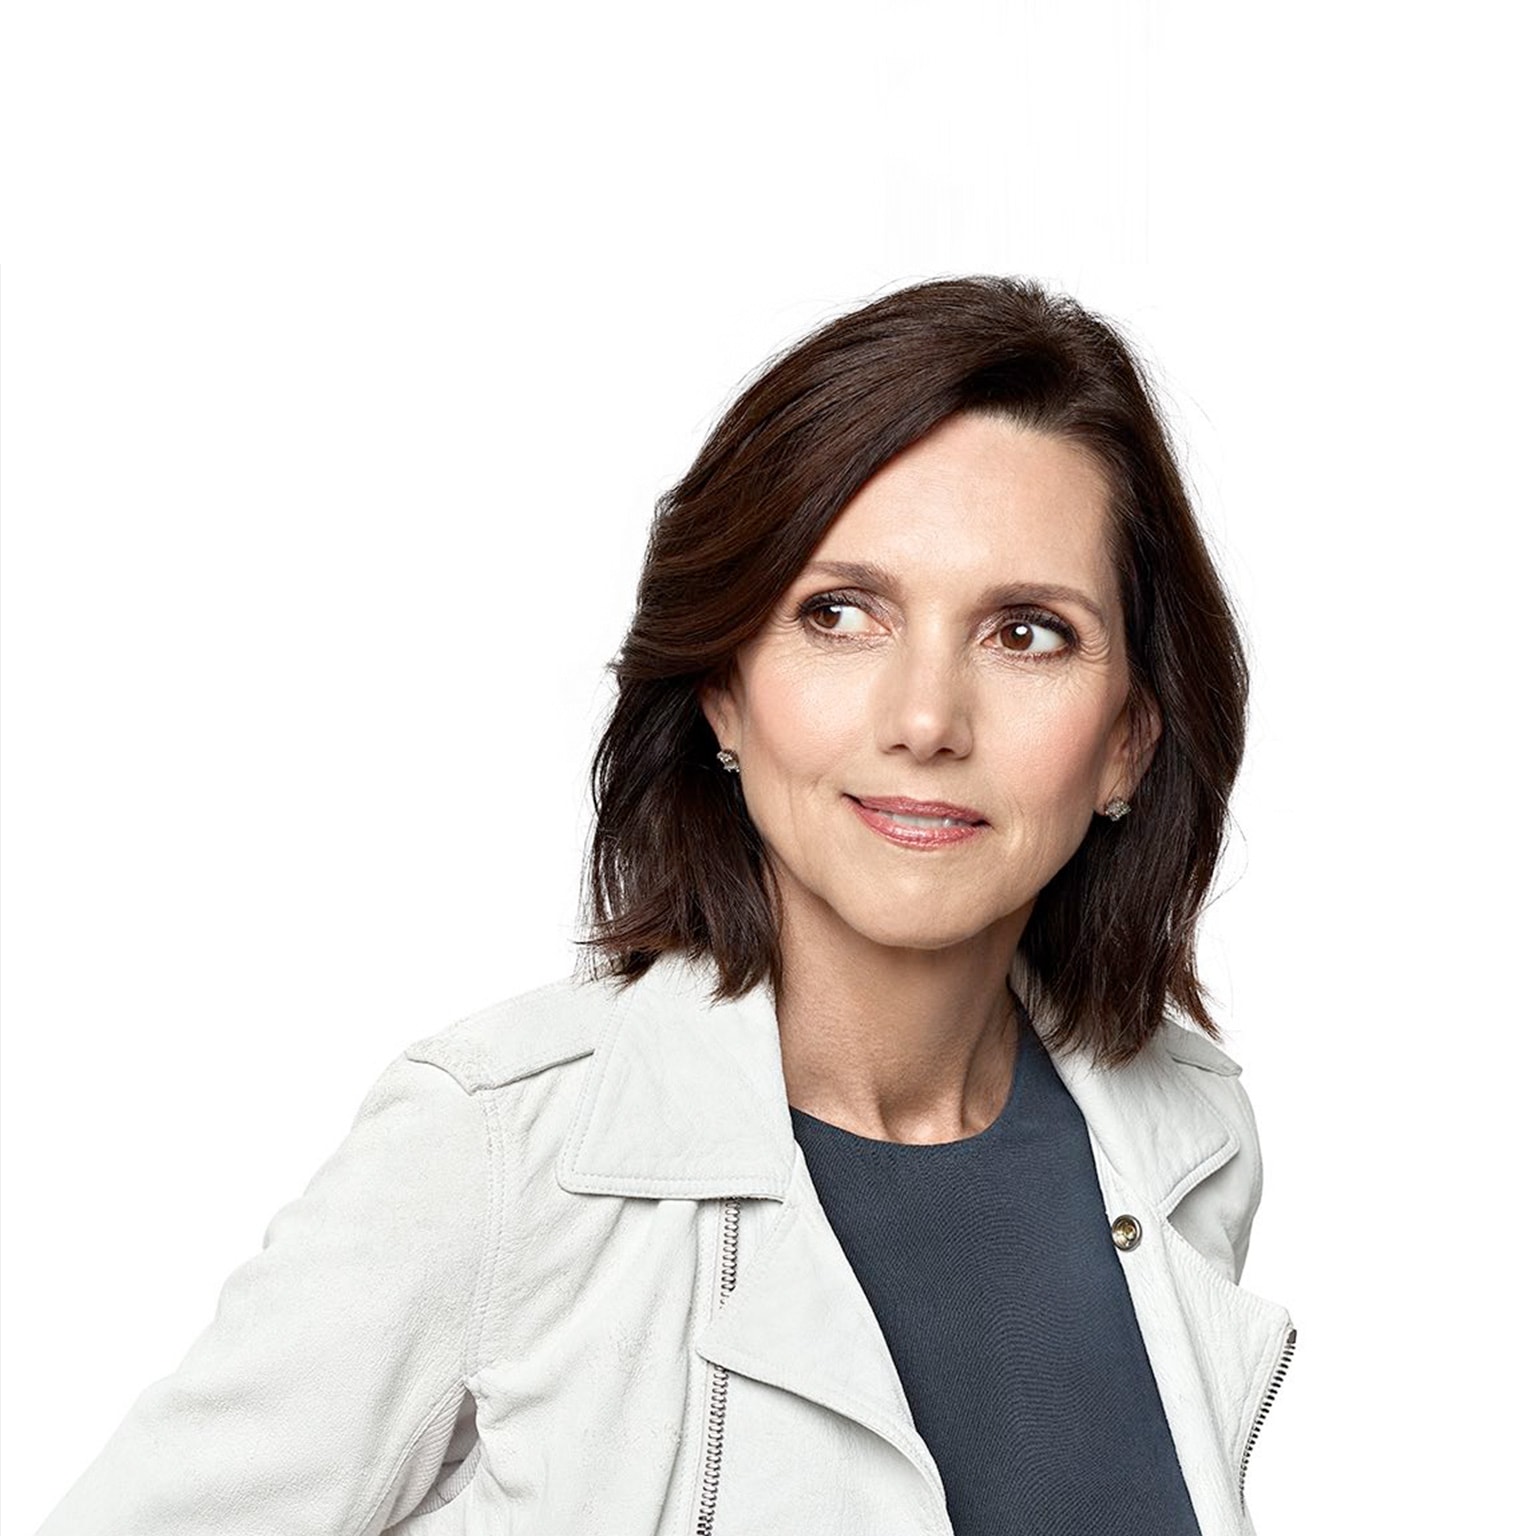 The committed innovator: A discussion with Beth Comstock